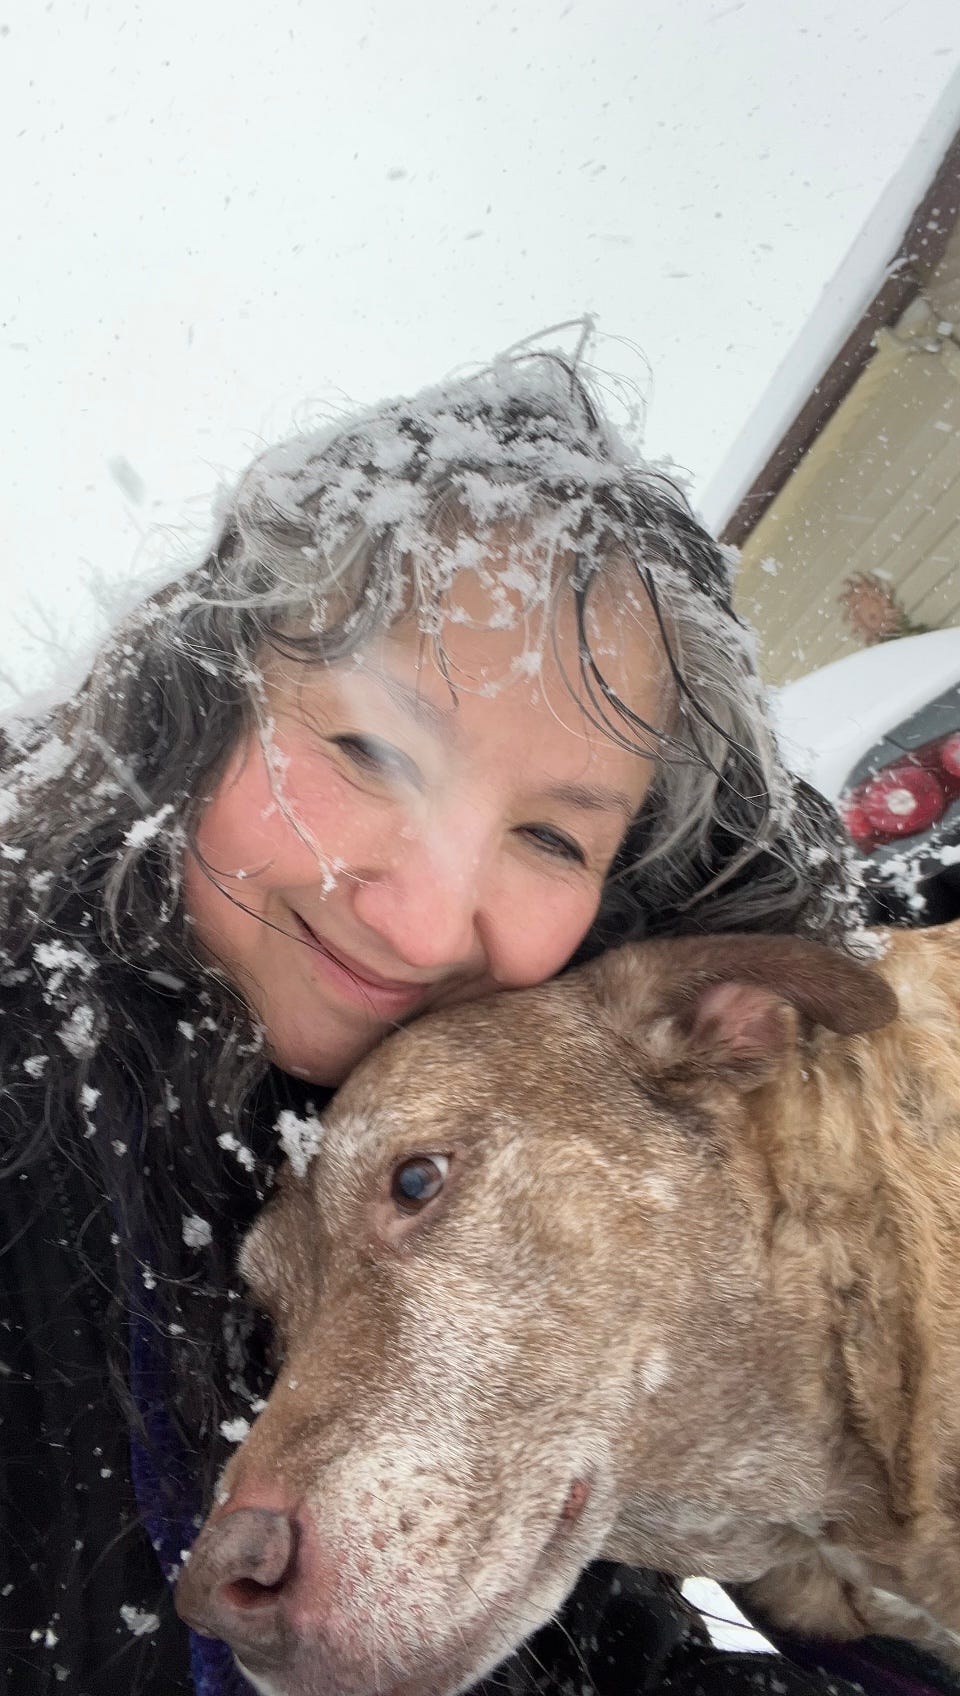 Demian hugging her pittie mix in the snow